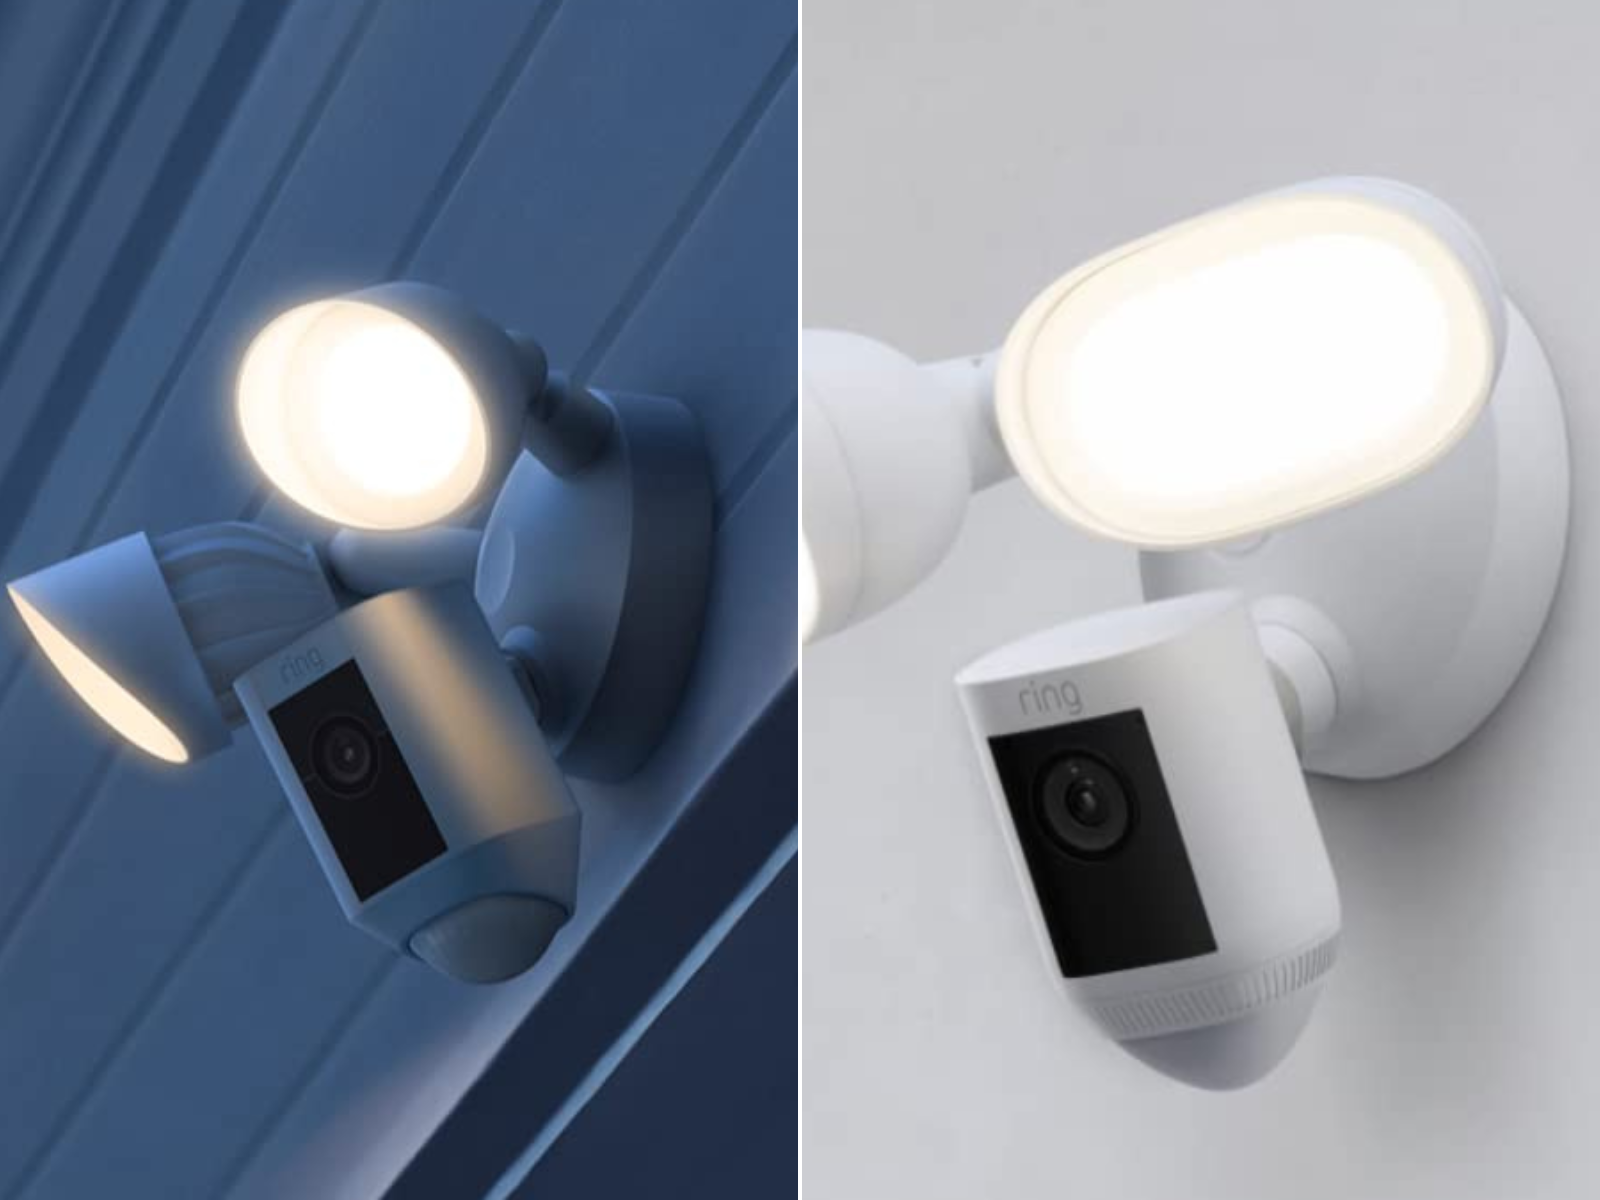 A floodlight camera in partial darkness, and a floodlight that has a birds eye view feature.